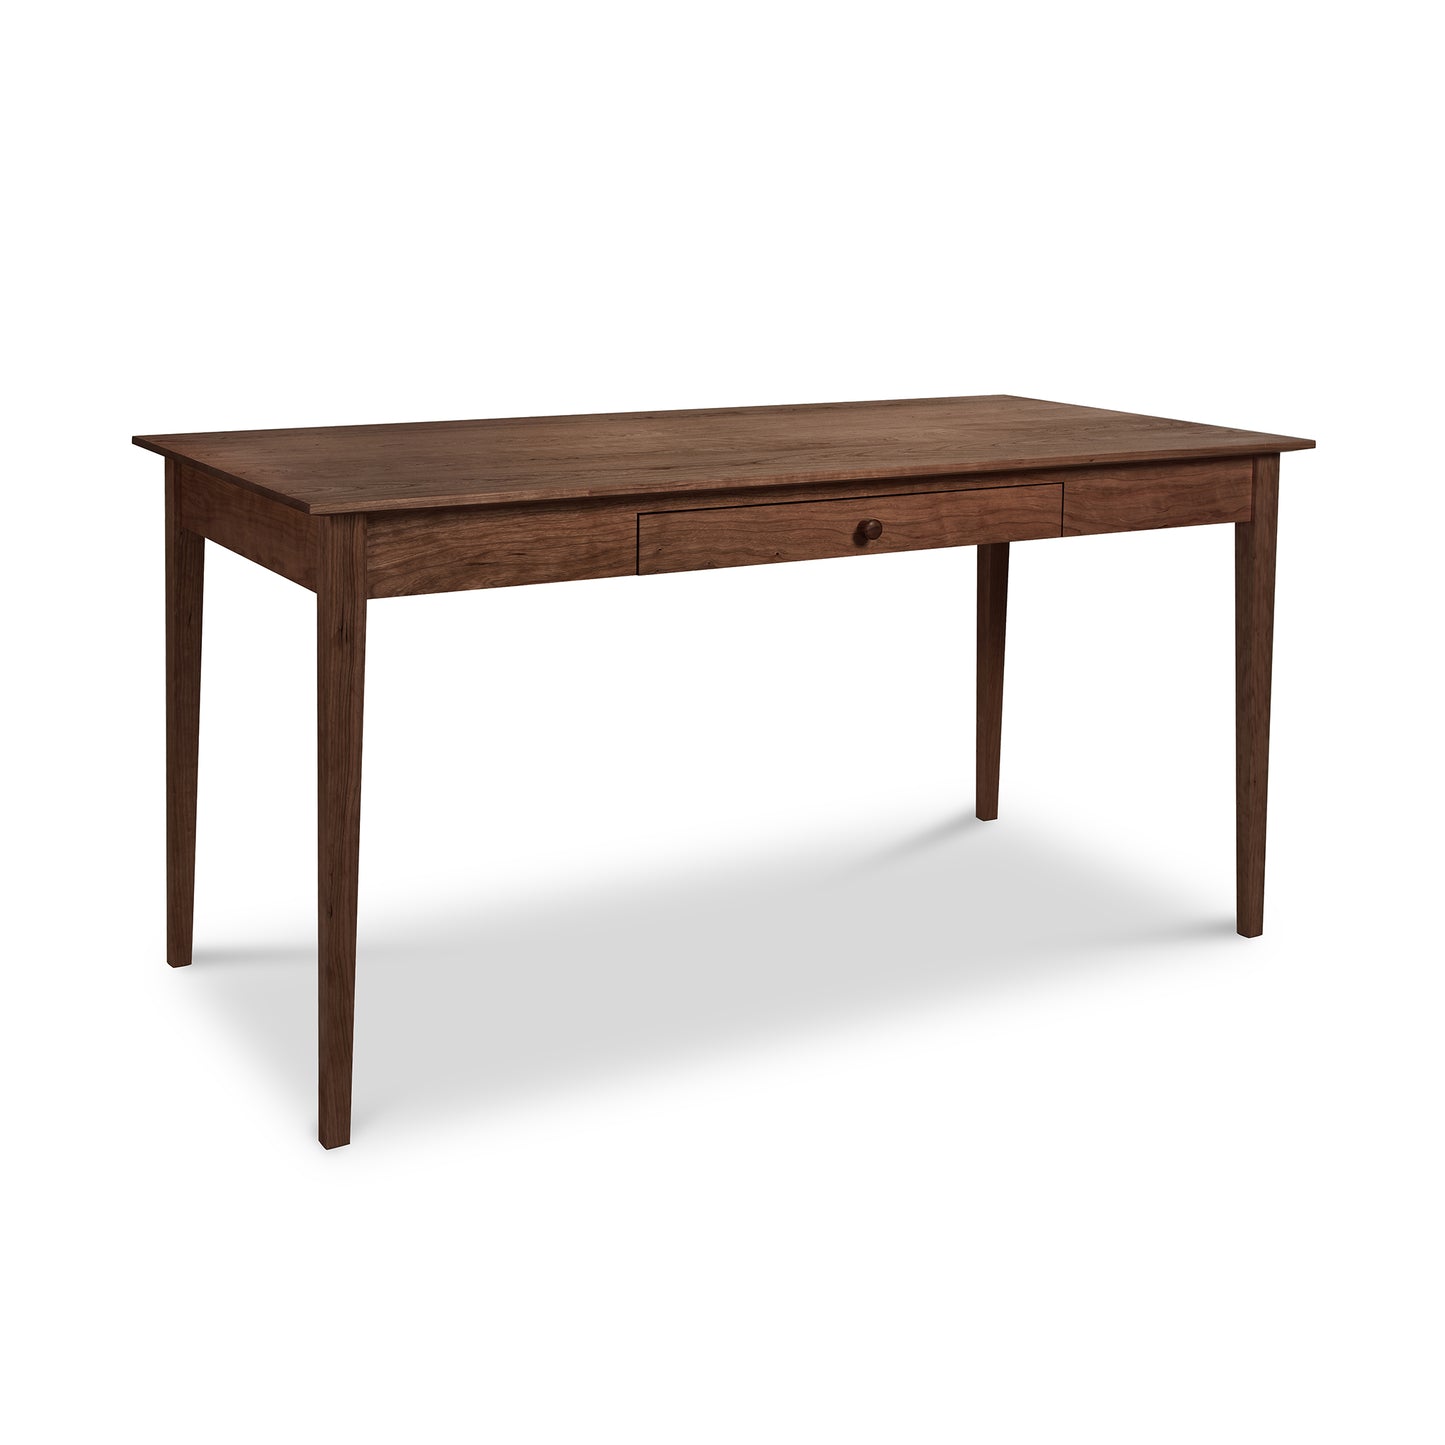 Vermont craftsmen-designed Maple Corner Woodworks American Shaker Writing Desk, a wooden table with a single drawer, crafted from sustainably harvested hardwood against a white background.